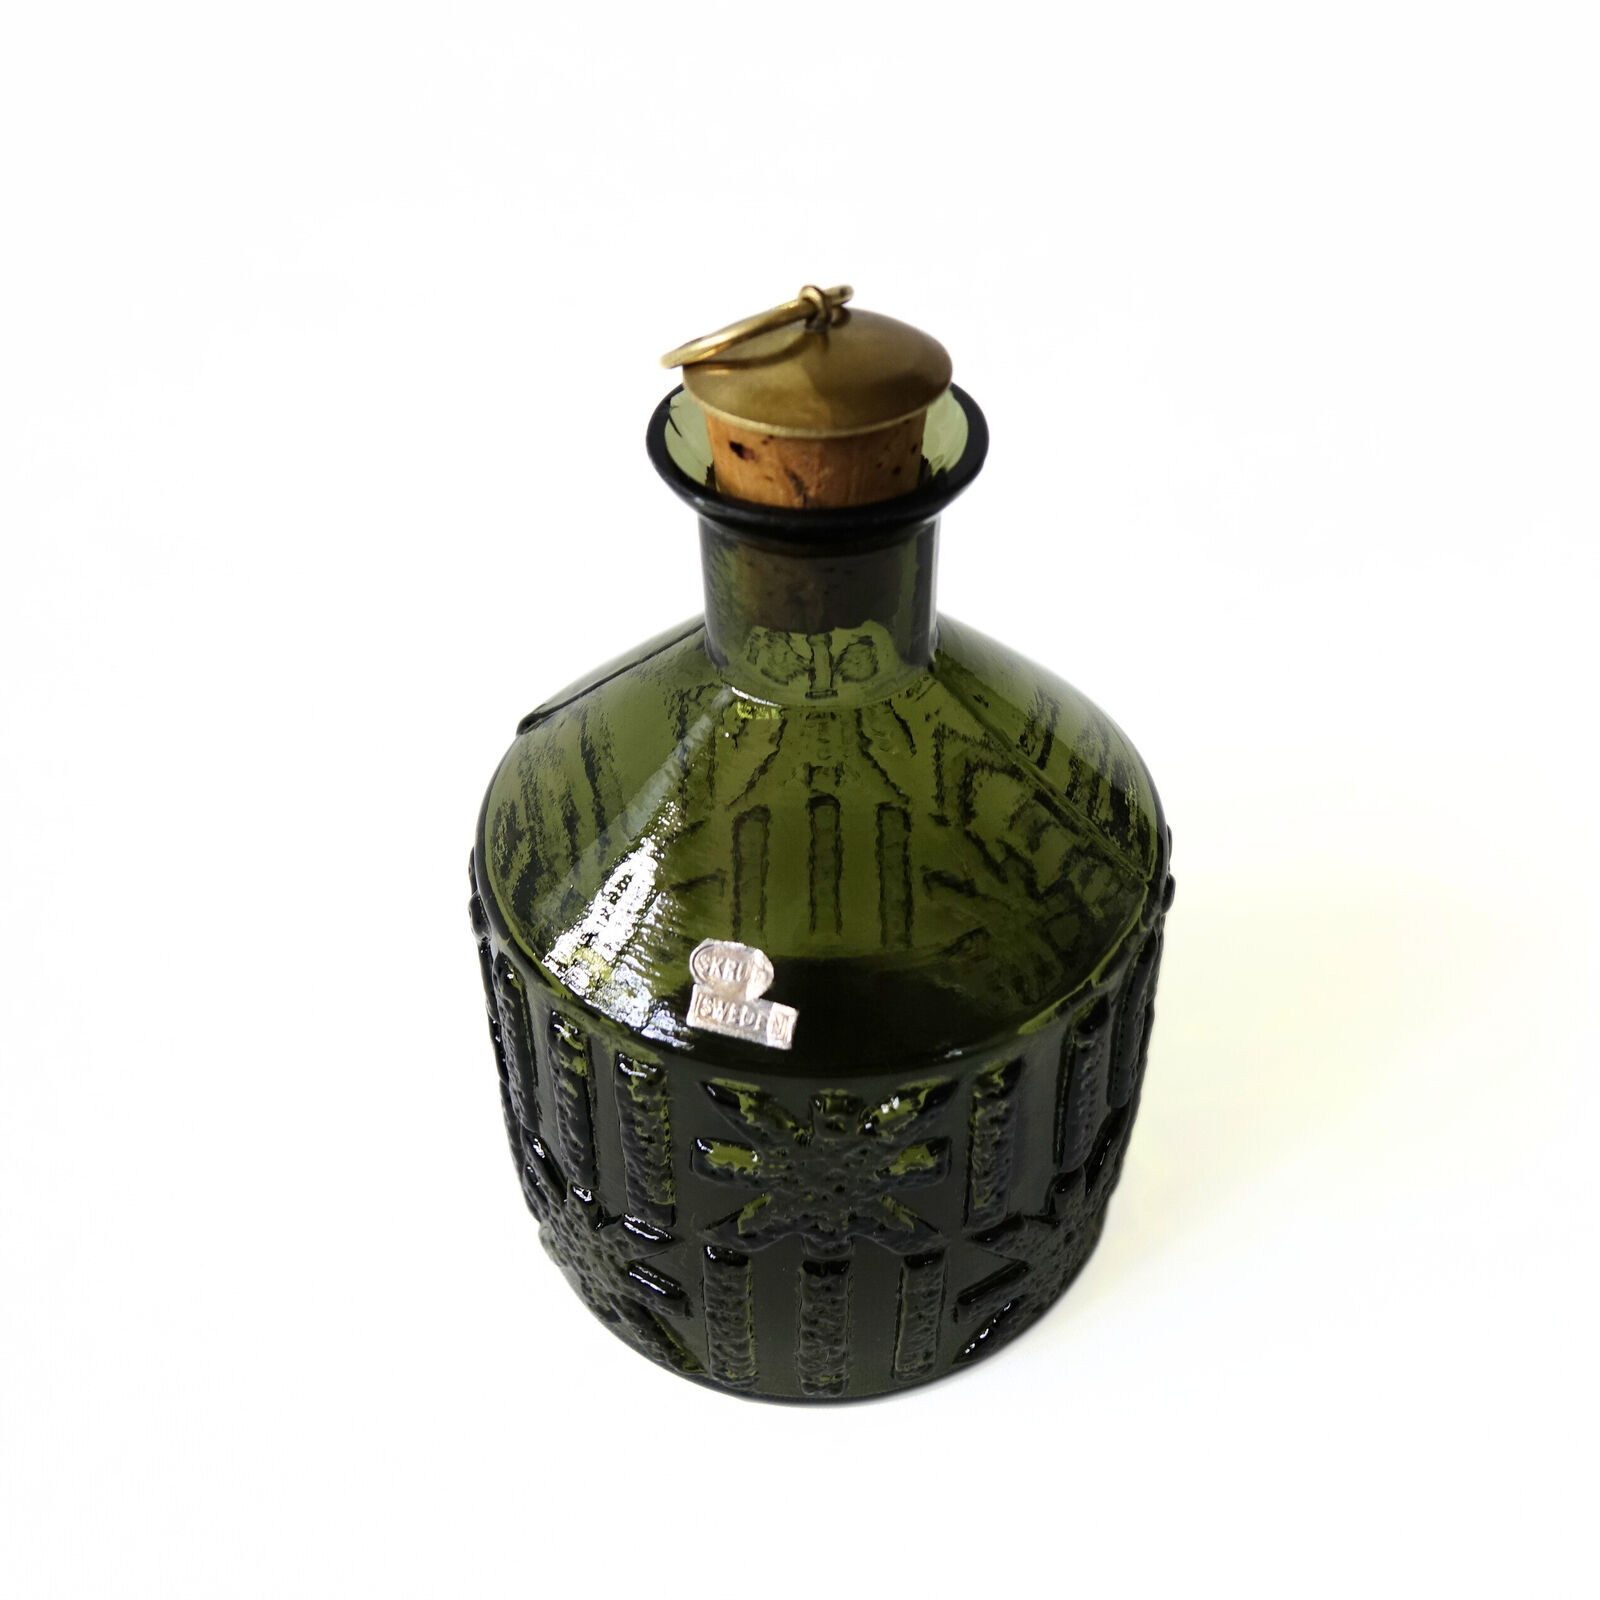 Vintage green glass decanter with cork and brass lid from SKRUF Sweden